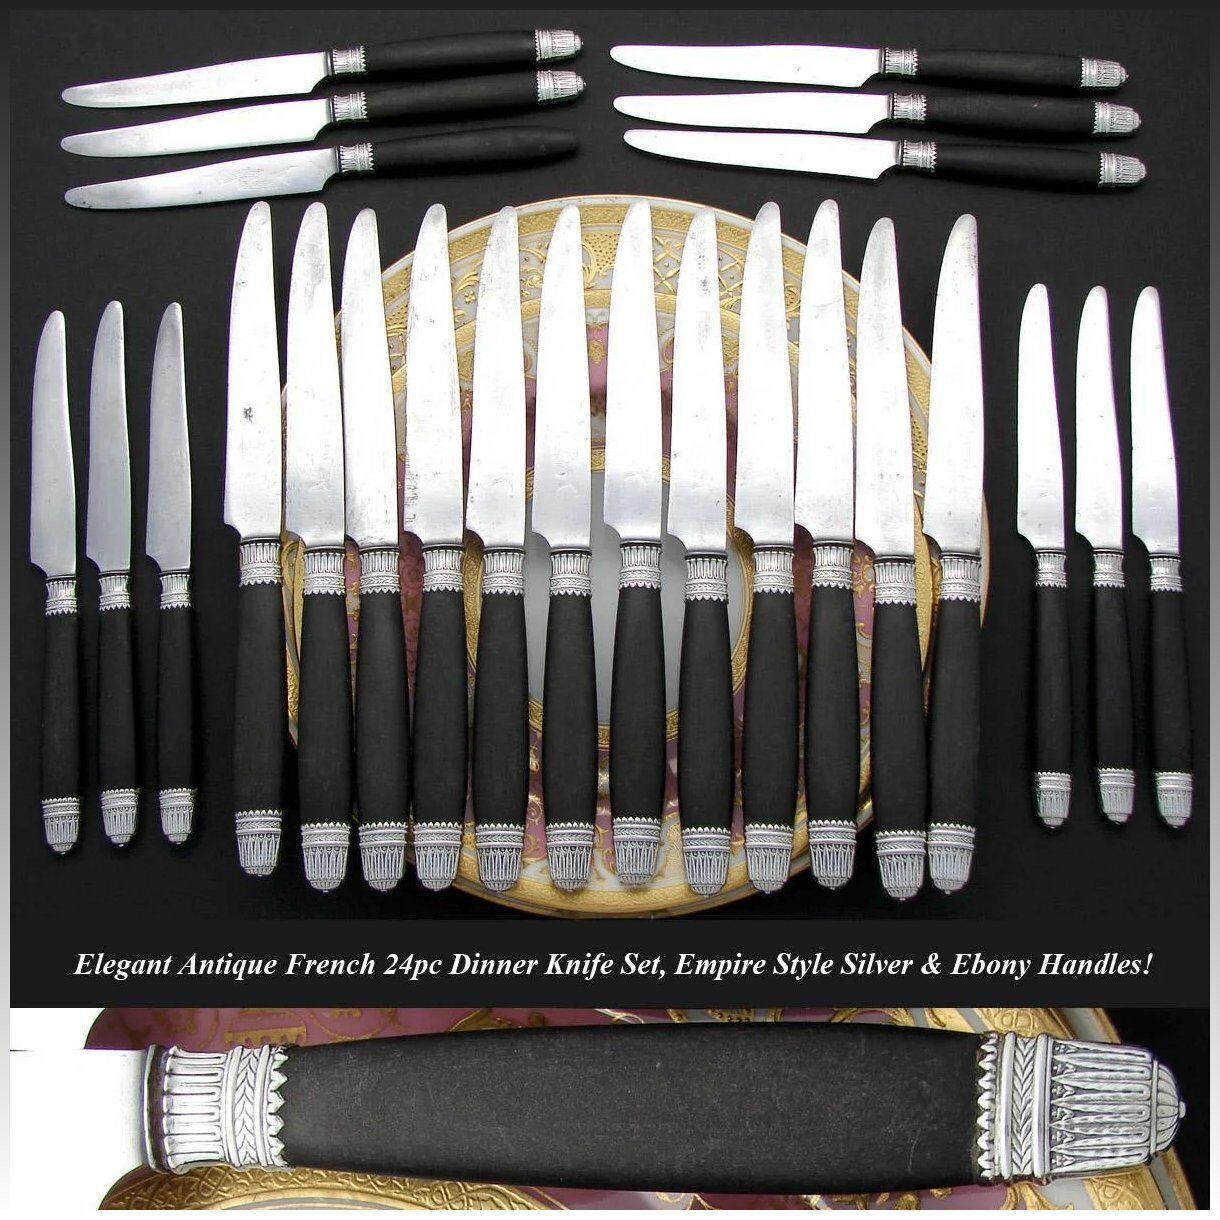 Antique French Napoleon III Era 24pc Dinner Knife Set, Sterling